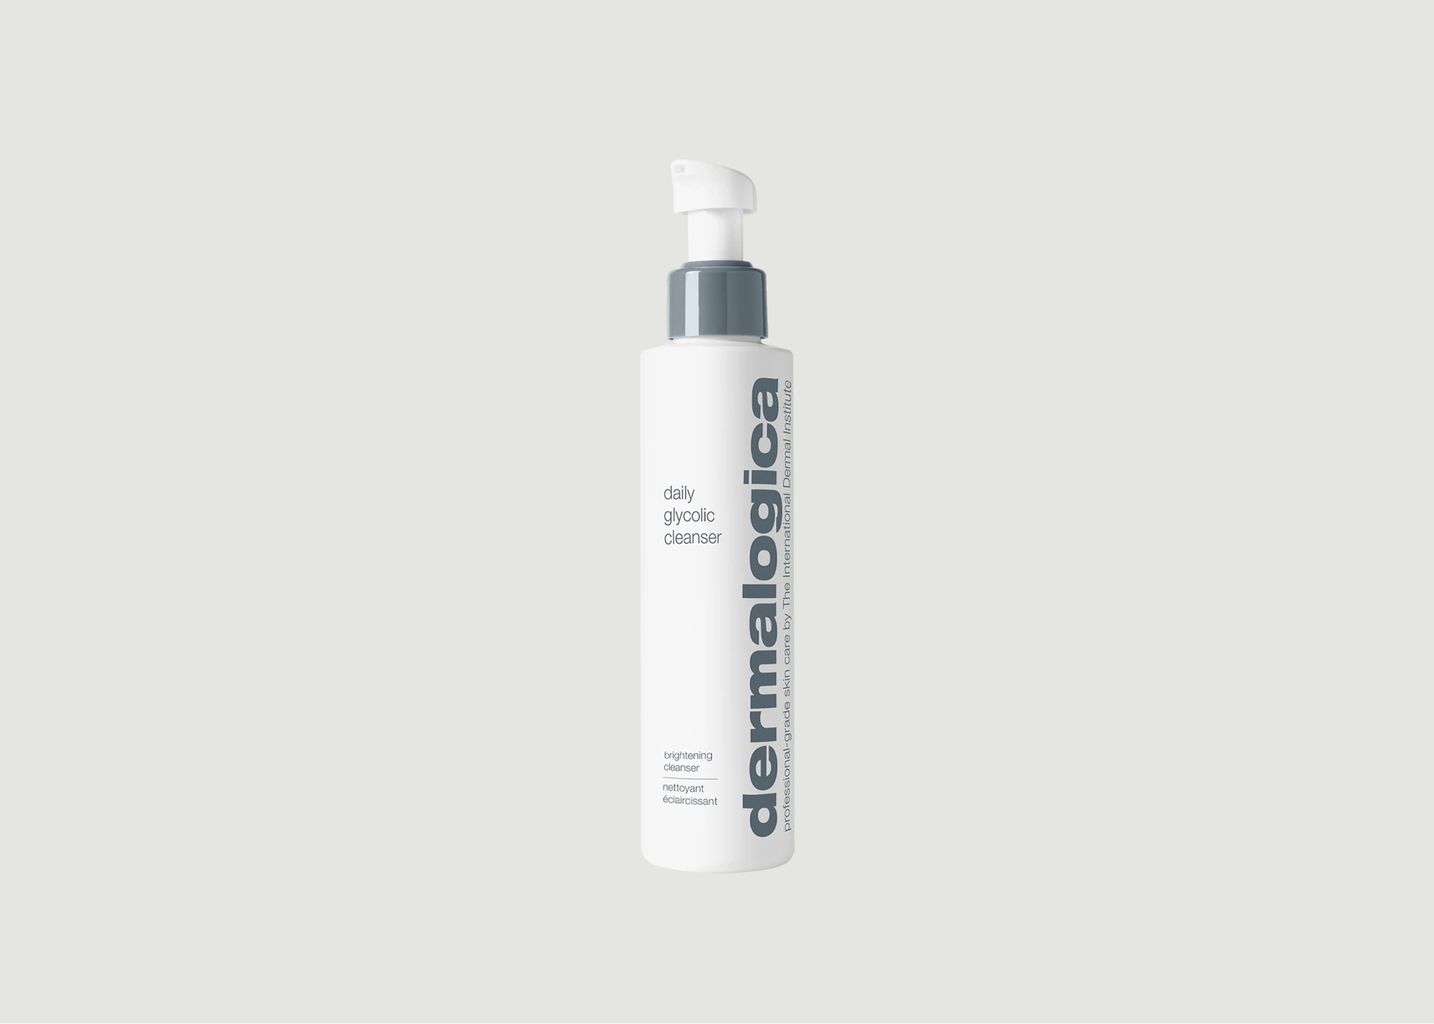 Daily glycolic cleanser 150ml - Dermalogica